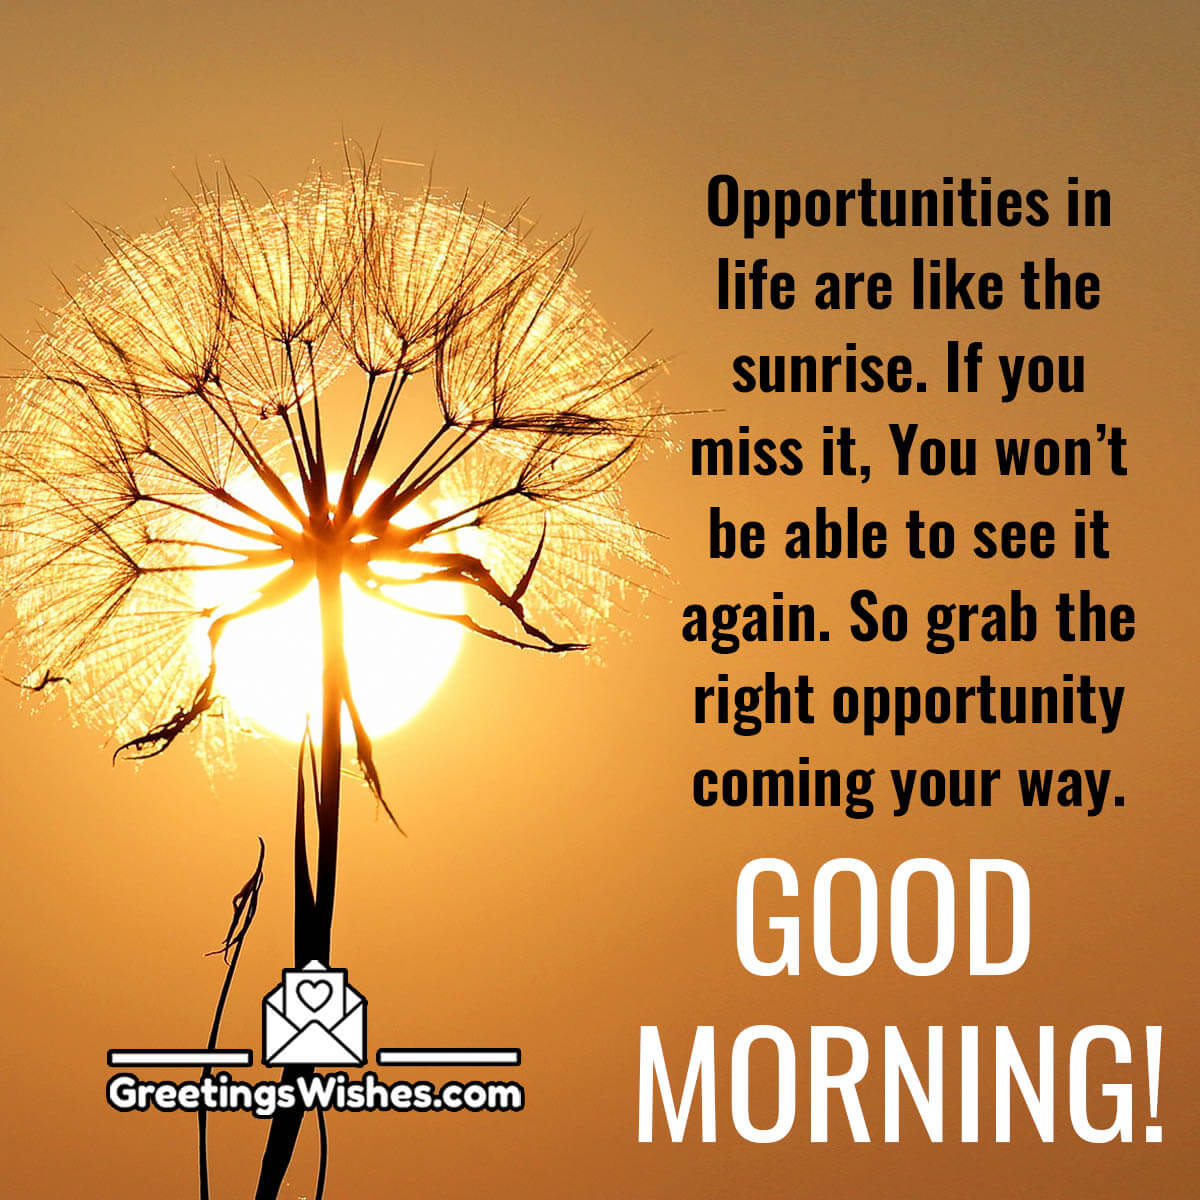 Inspirational Good Morning Wishes - Greetings Wishes